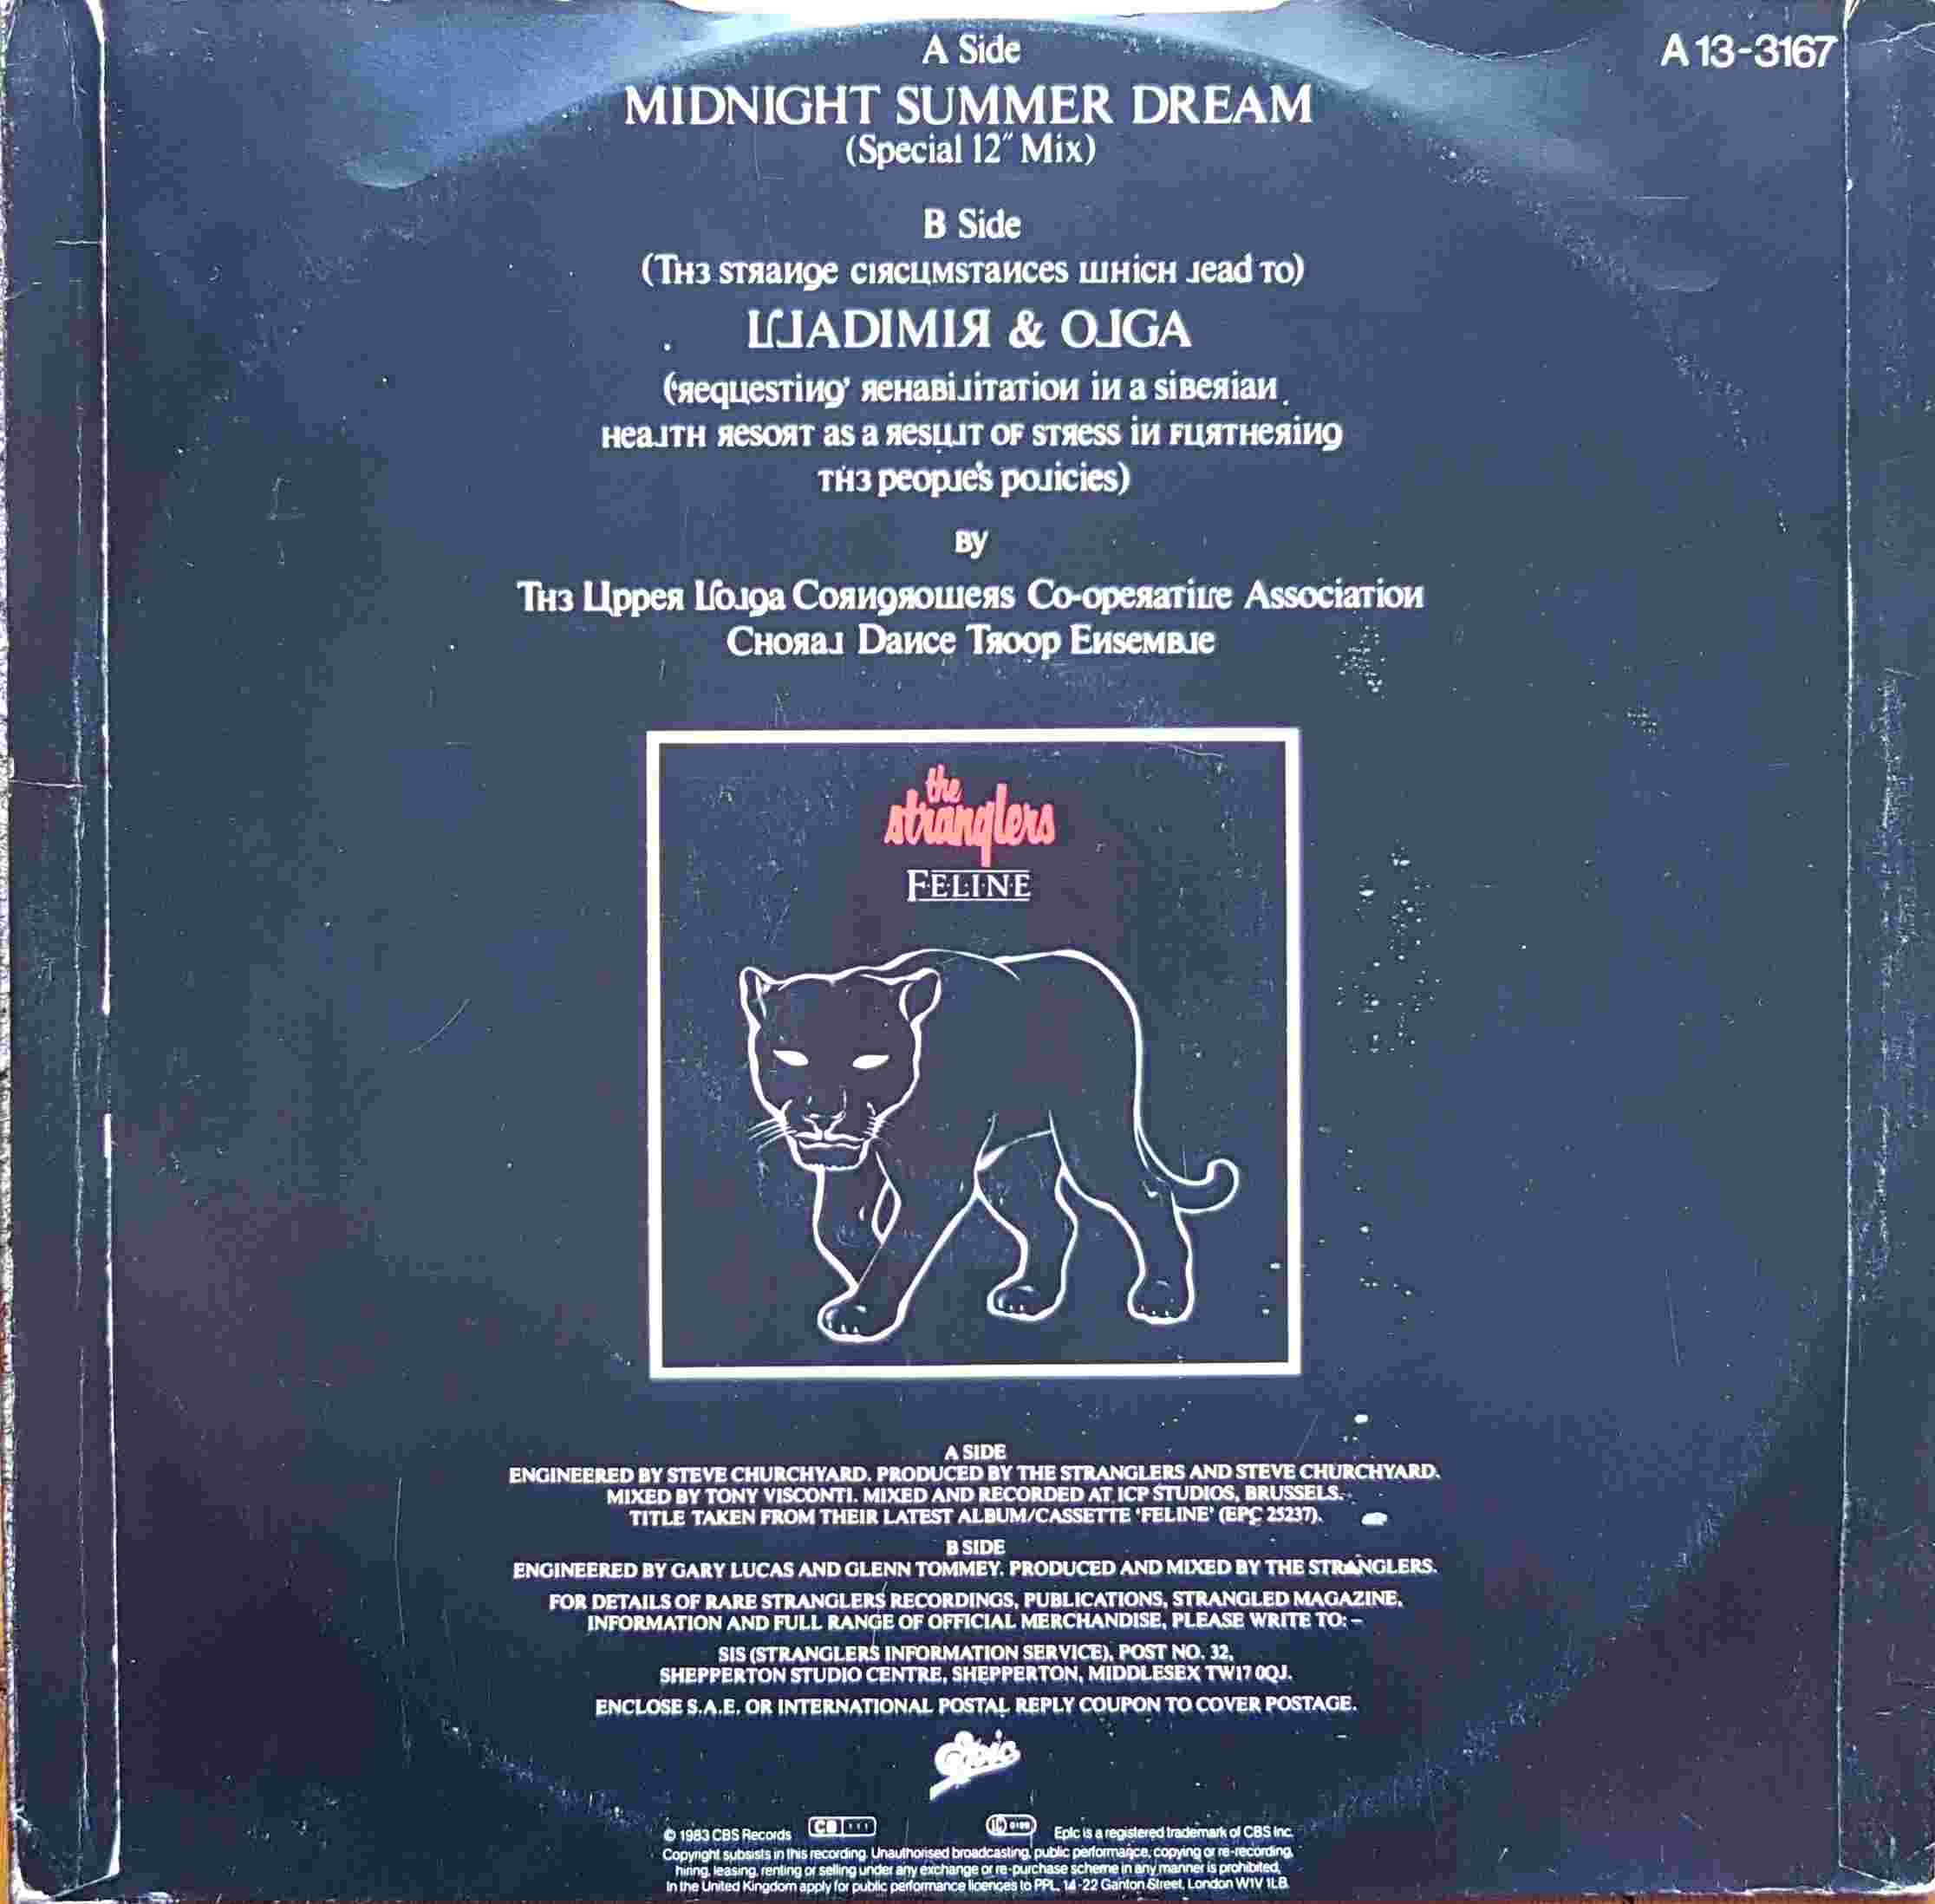 Picture of A13 - 3167 Midnight summer dream (Special single mix) by artist The Stranglers from The Stranglers